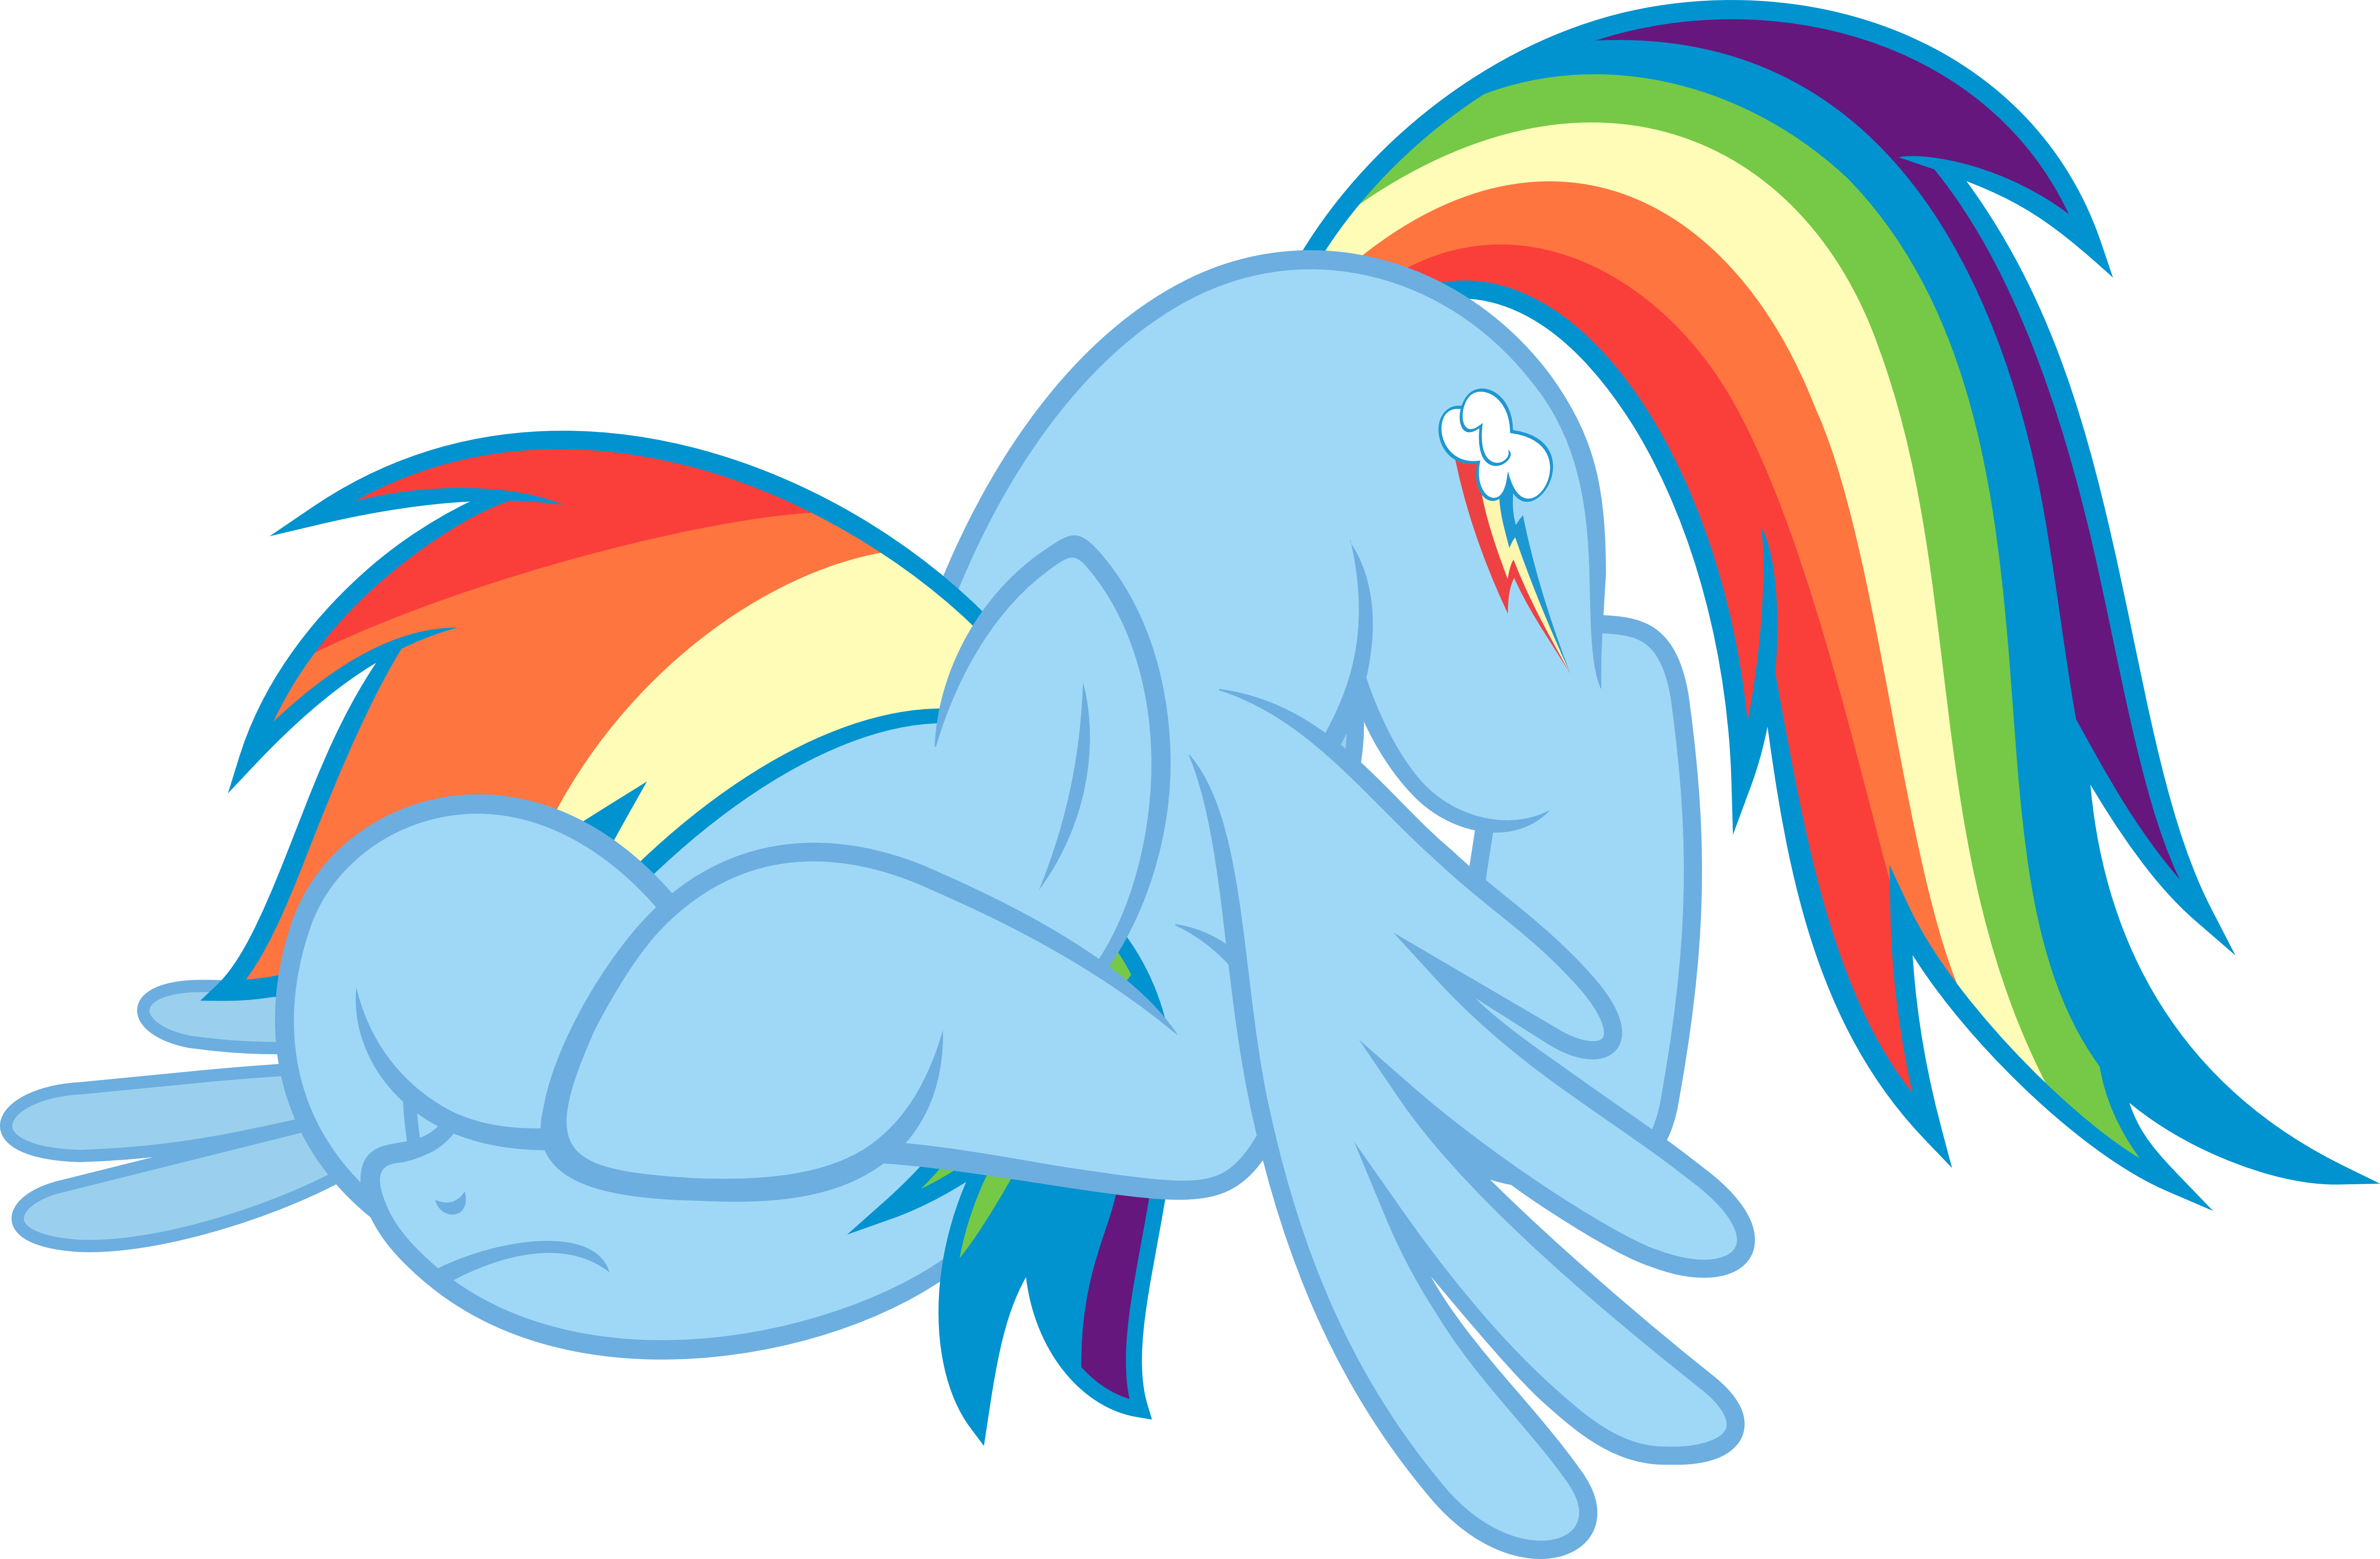 Slb94, Covering Eyes, Embarrassed, Face Down Ass Up, - Mlp Rainbow Dash Covering Her Eyes (6000x3931)